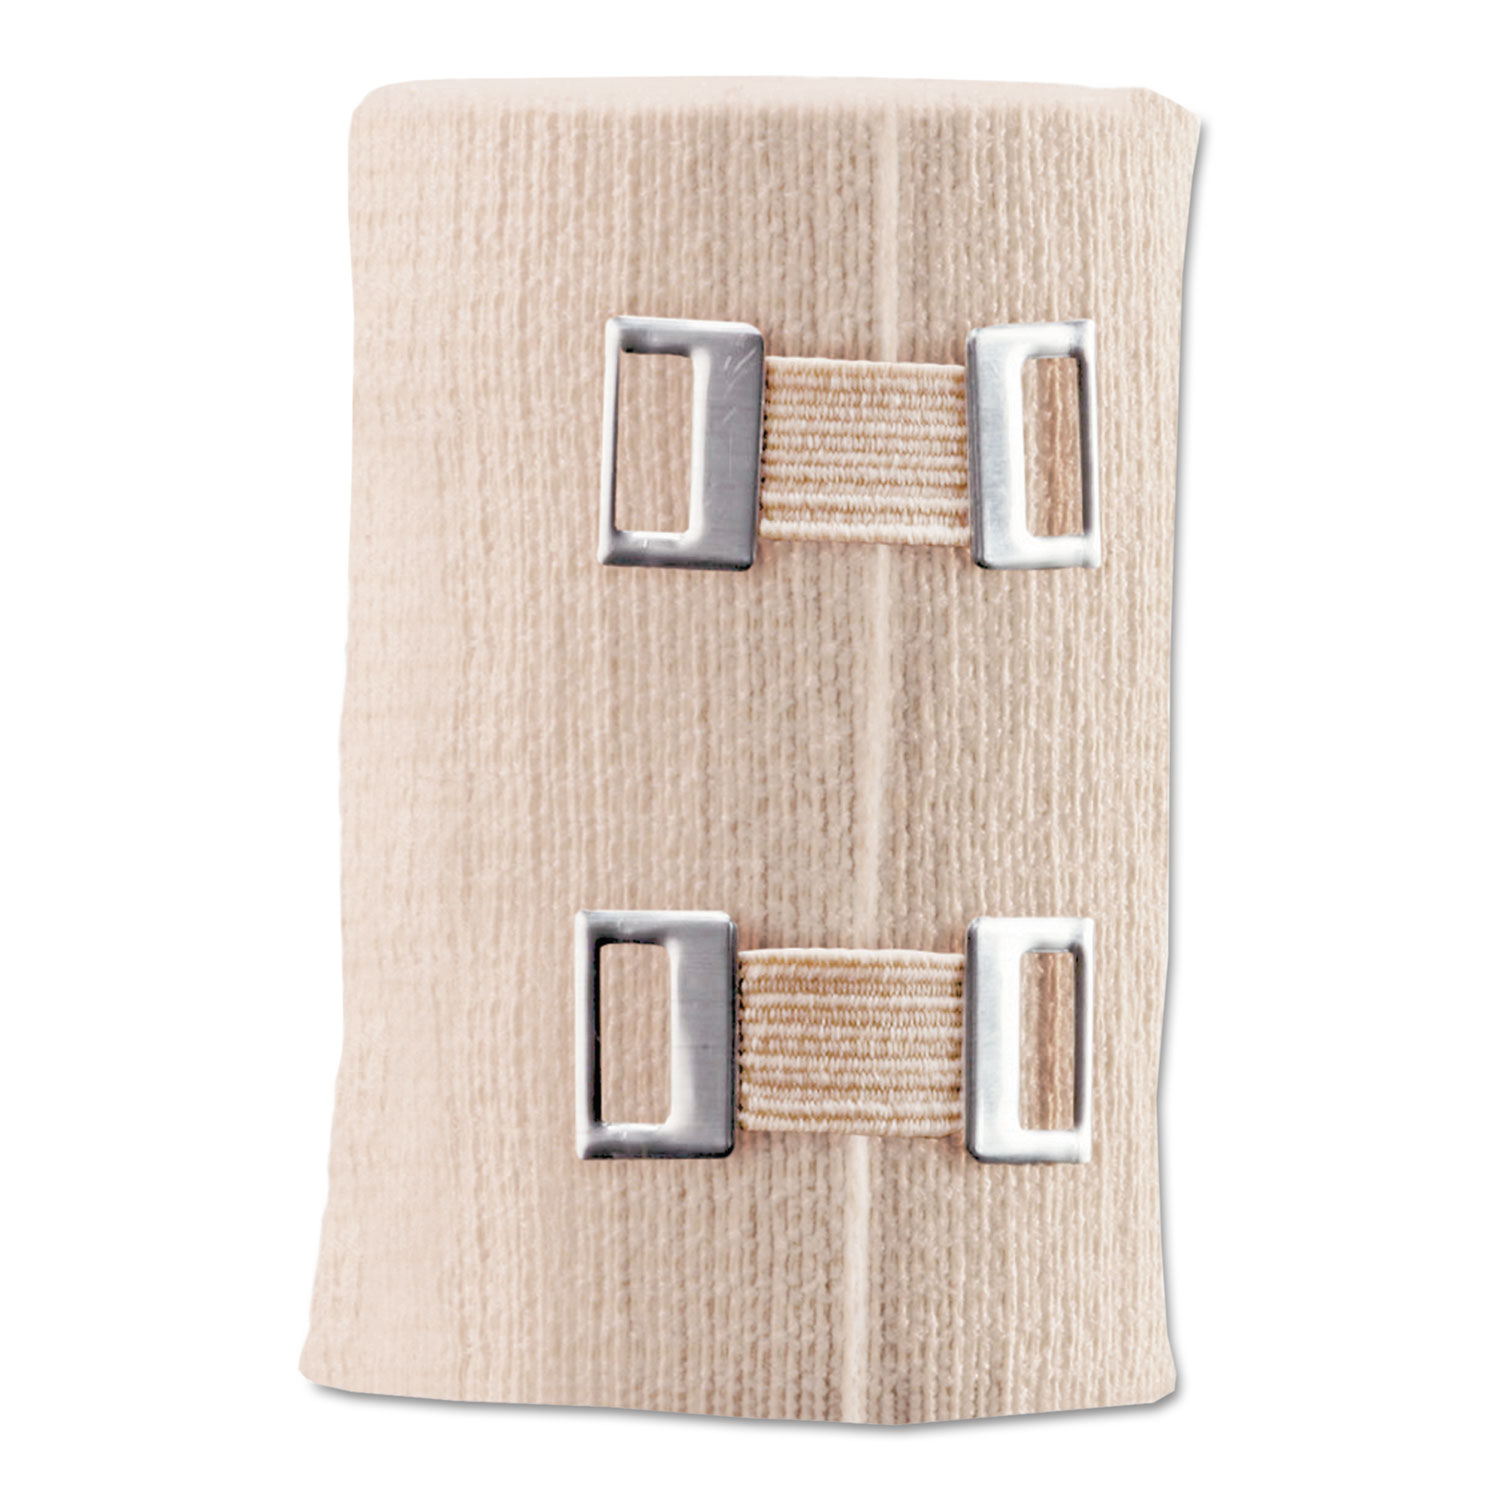  ACE 207314 Elastic Bandage with E-Z Clips, 3 x 64 (MMM207314) 